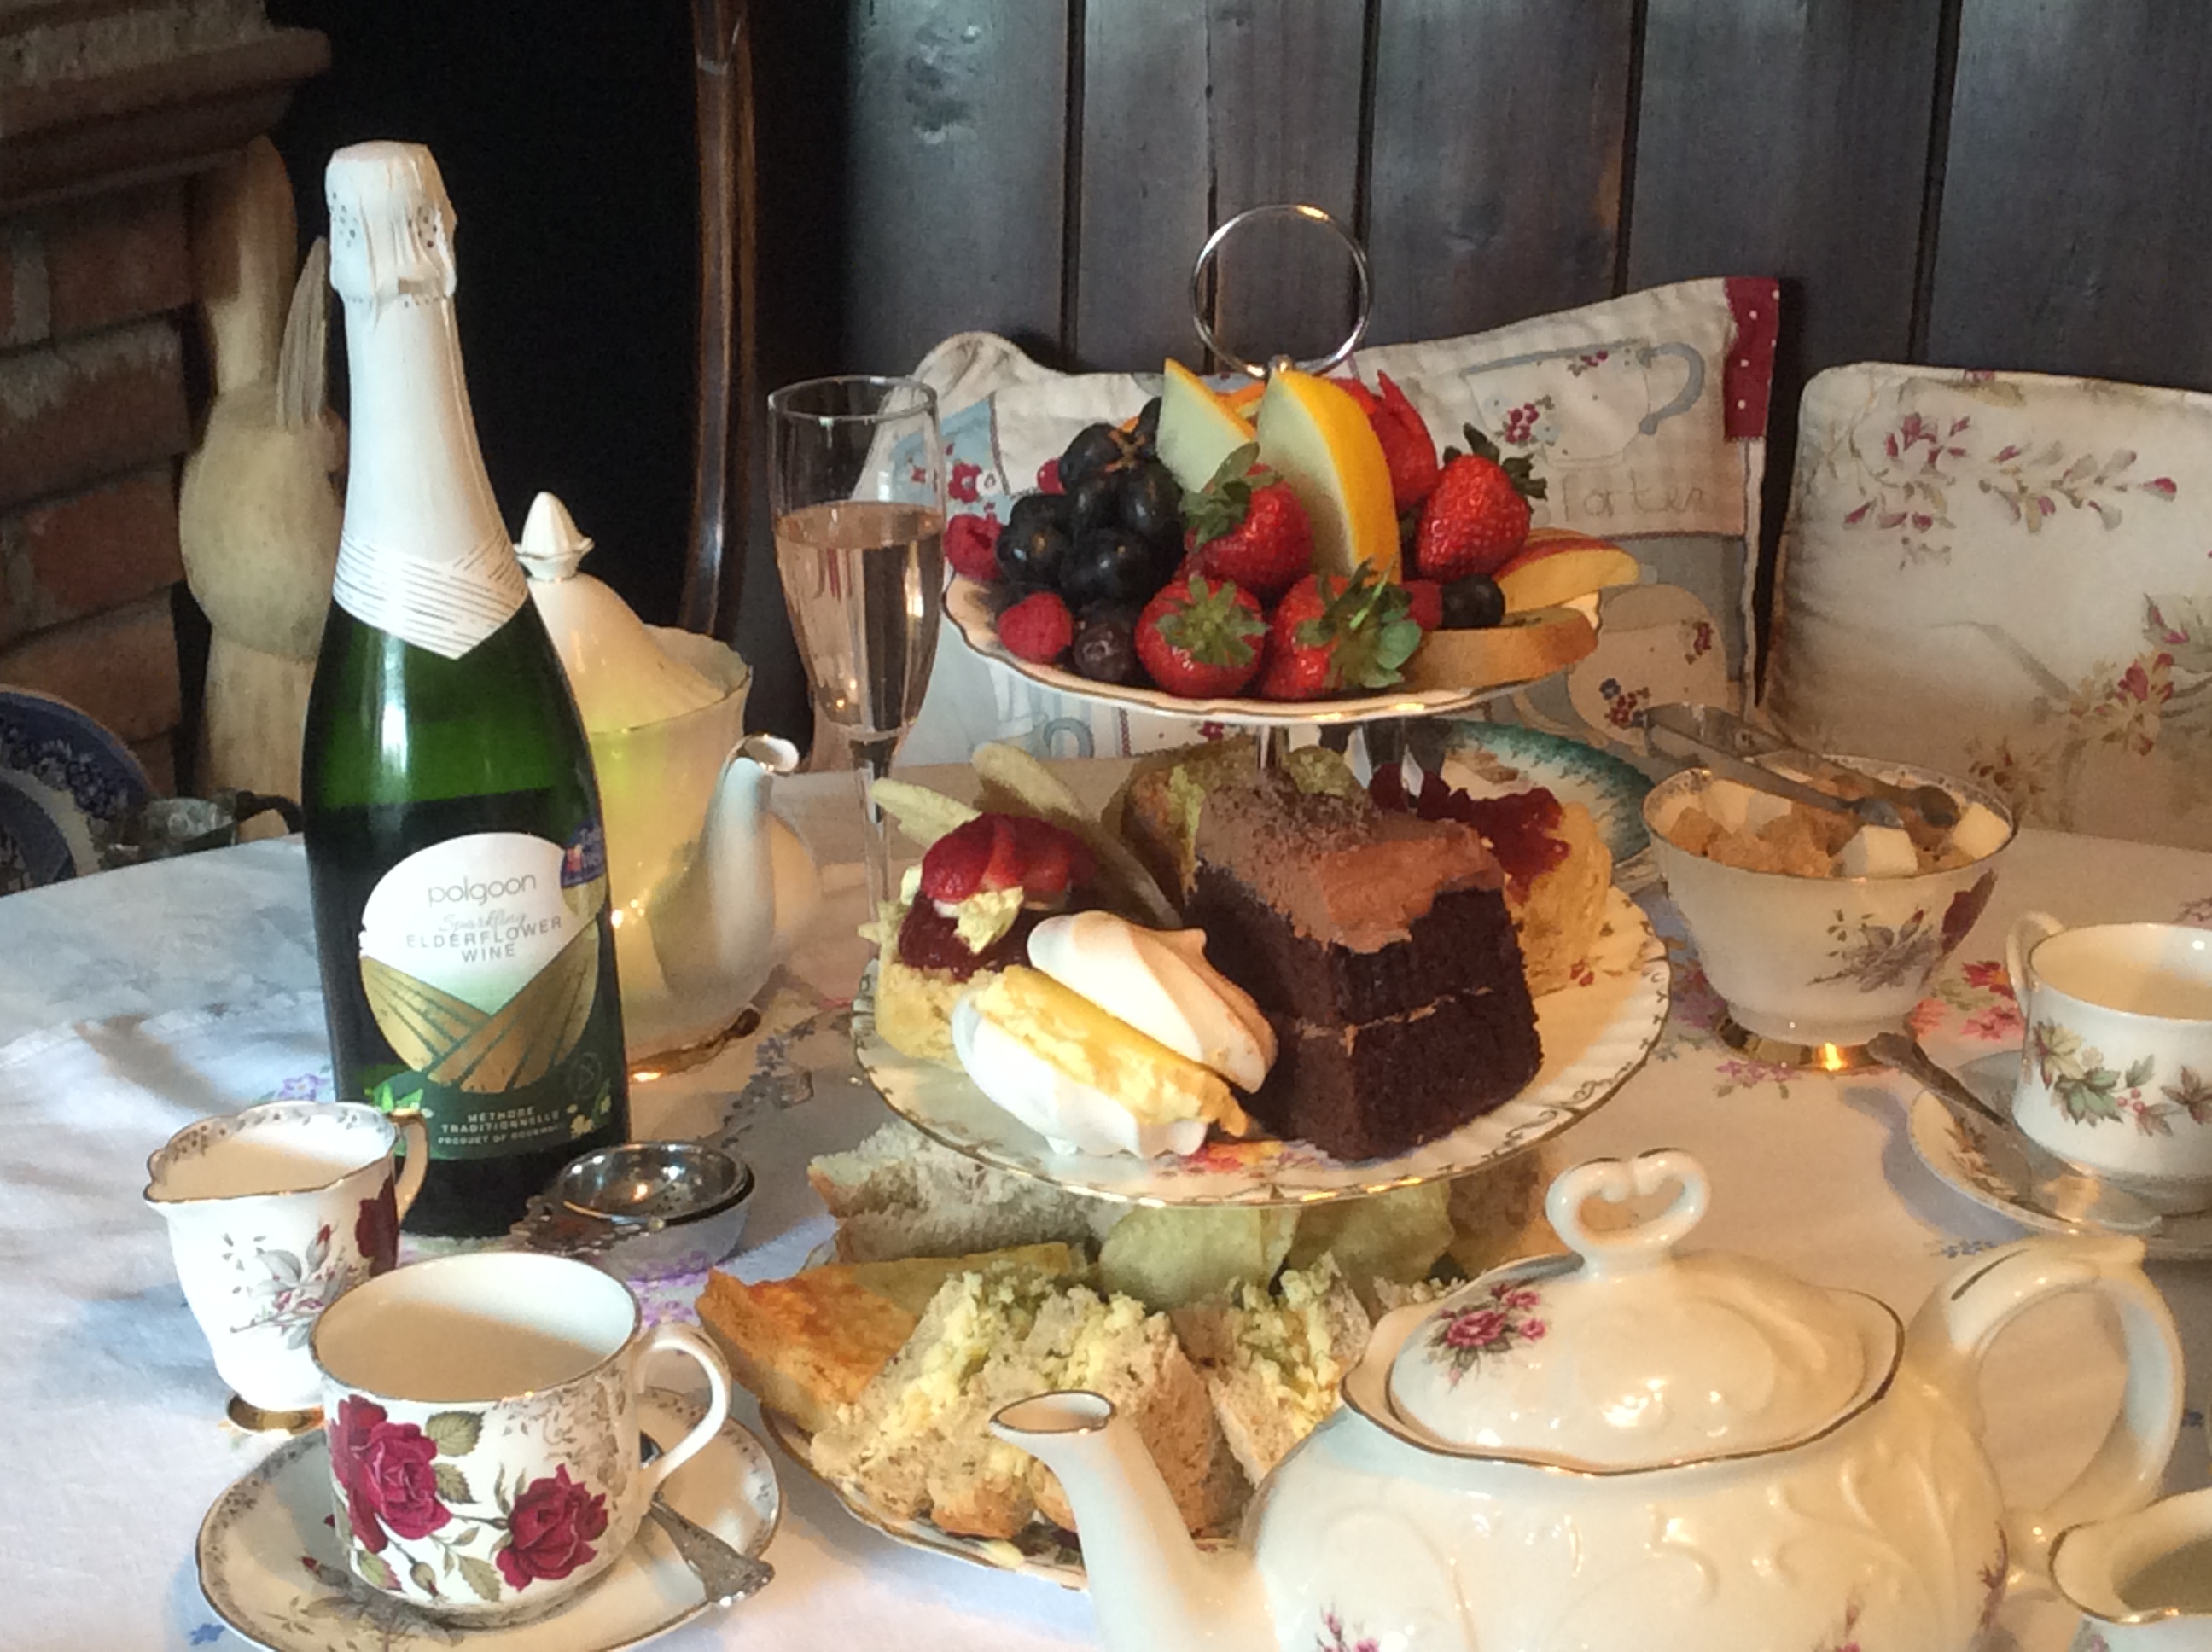 Our High Tea with Bubbly